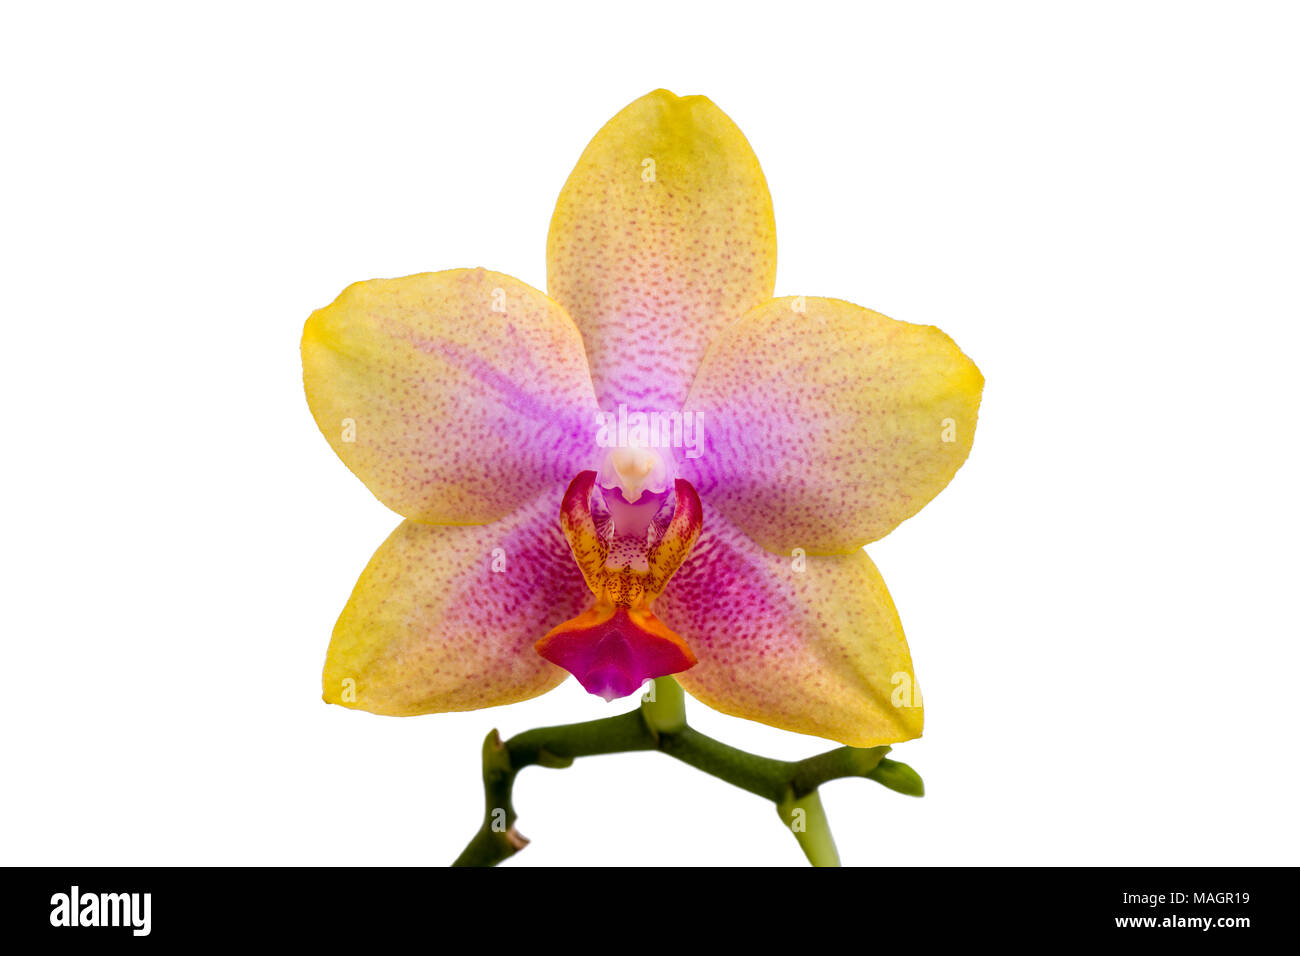 Single Phalaenopsis Orchid (Moth Orchid) blossom on green stem with yellow petals and cyclamen colored labellum and column isolated on white backgroun Stock Photo